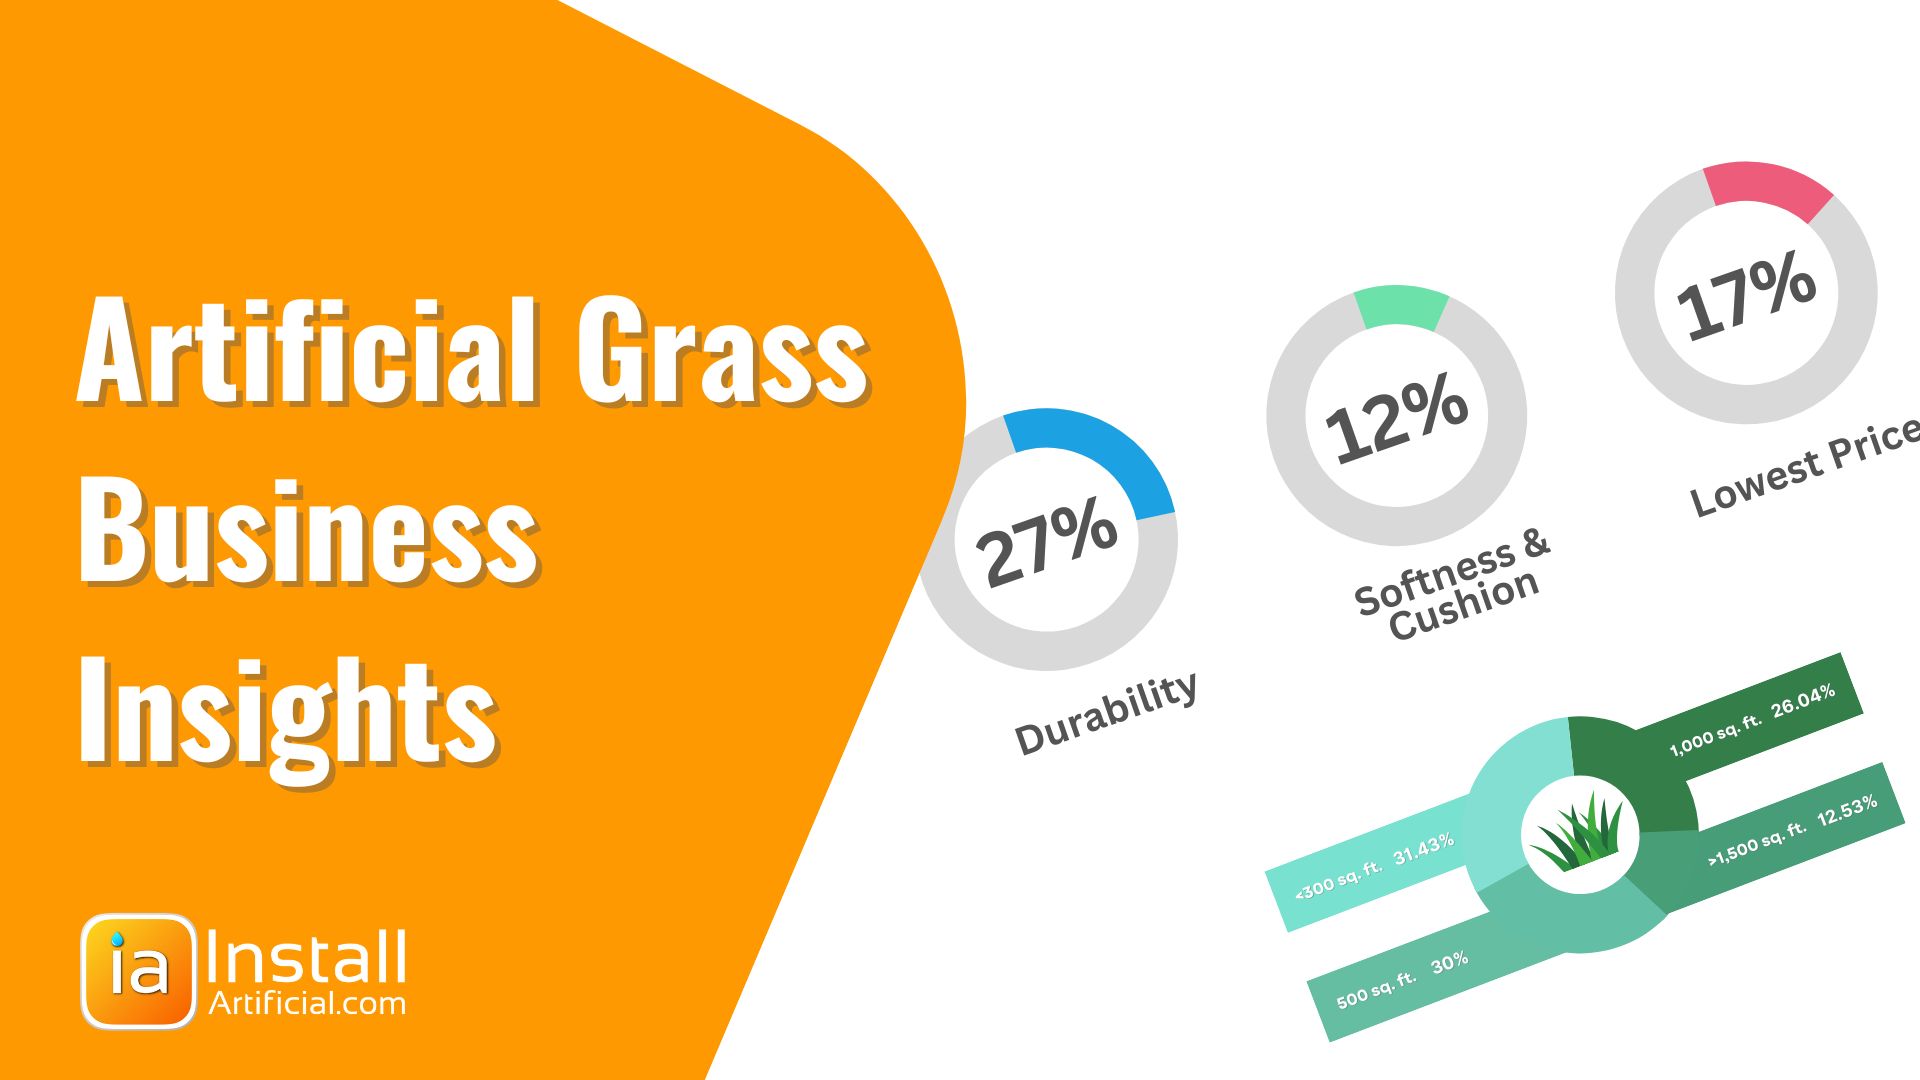 Artificial Grass Business Insights, Market Trends, and Analysis